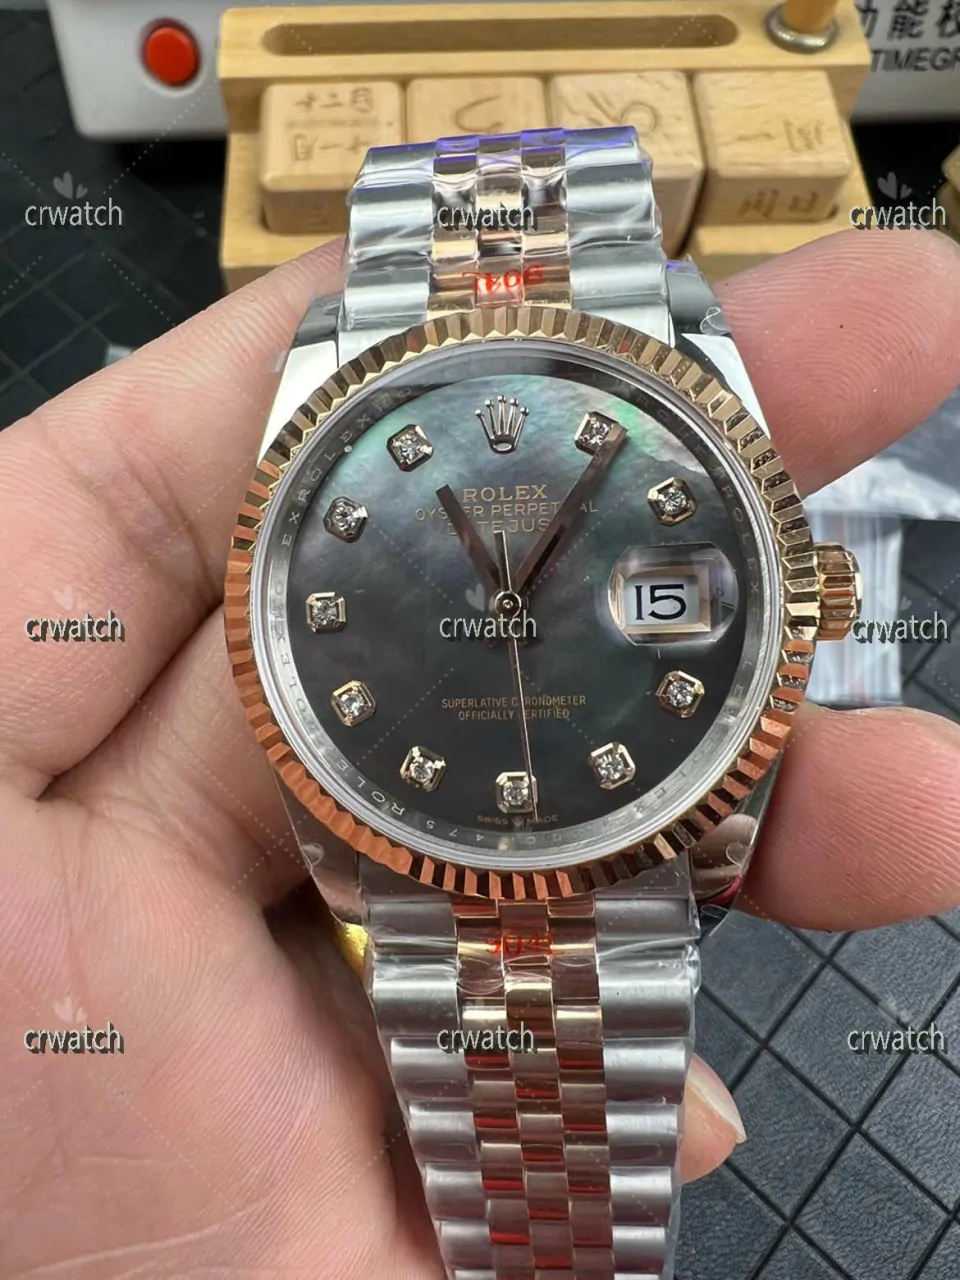 DateJust 36 SS/RG Wrapped 116231 GMF Gray MOP Dial Diamonds Markers SS/RG Wrapped Jubilee Bracelet SA3235